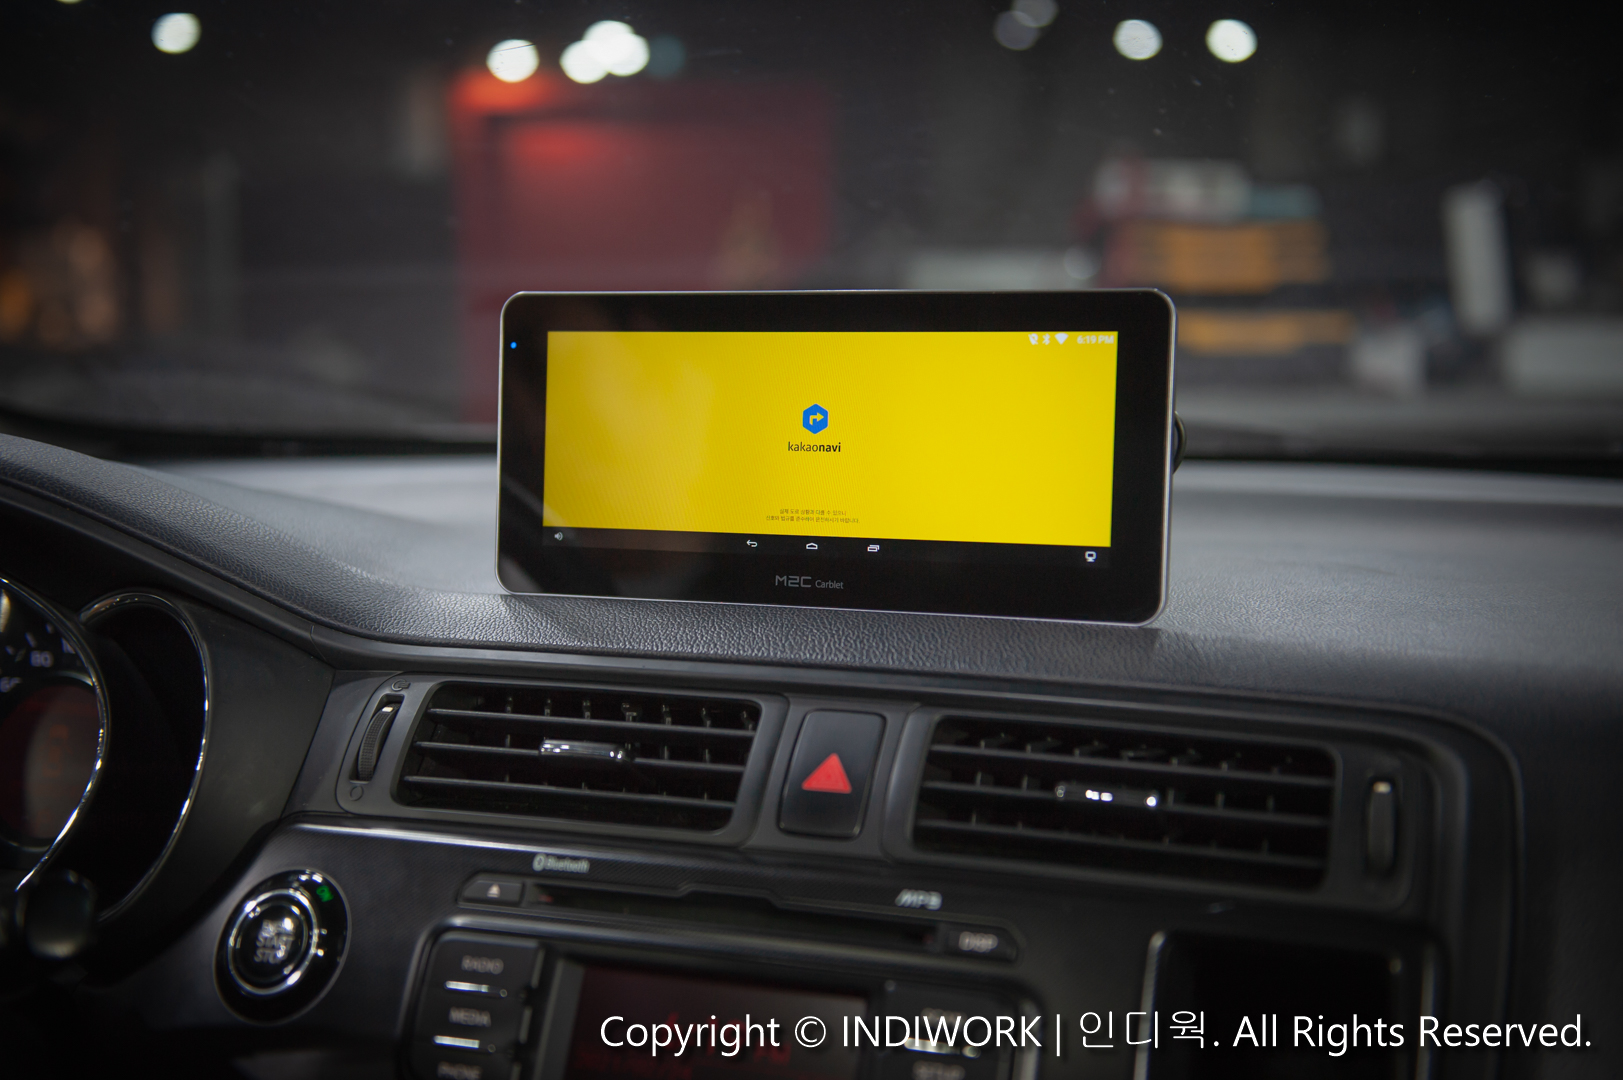 Android "CarPC" on the dashboard "M2C-8800" Wide 8.8inch